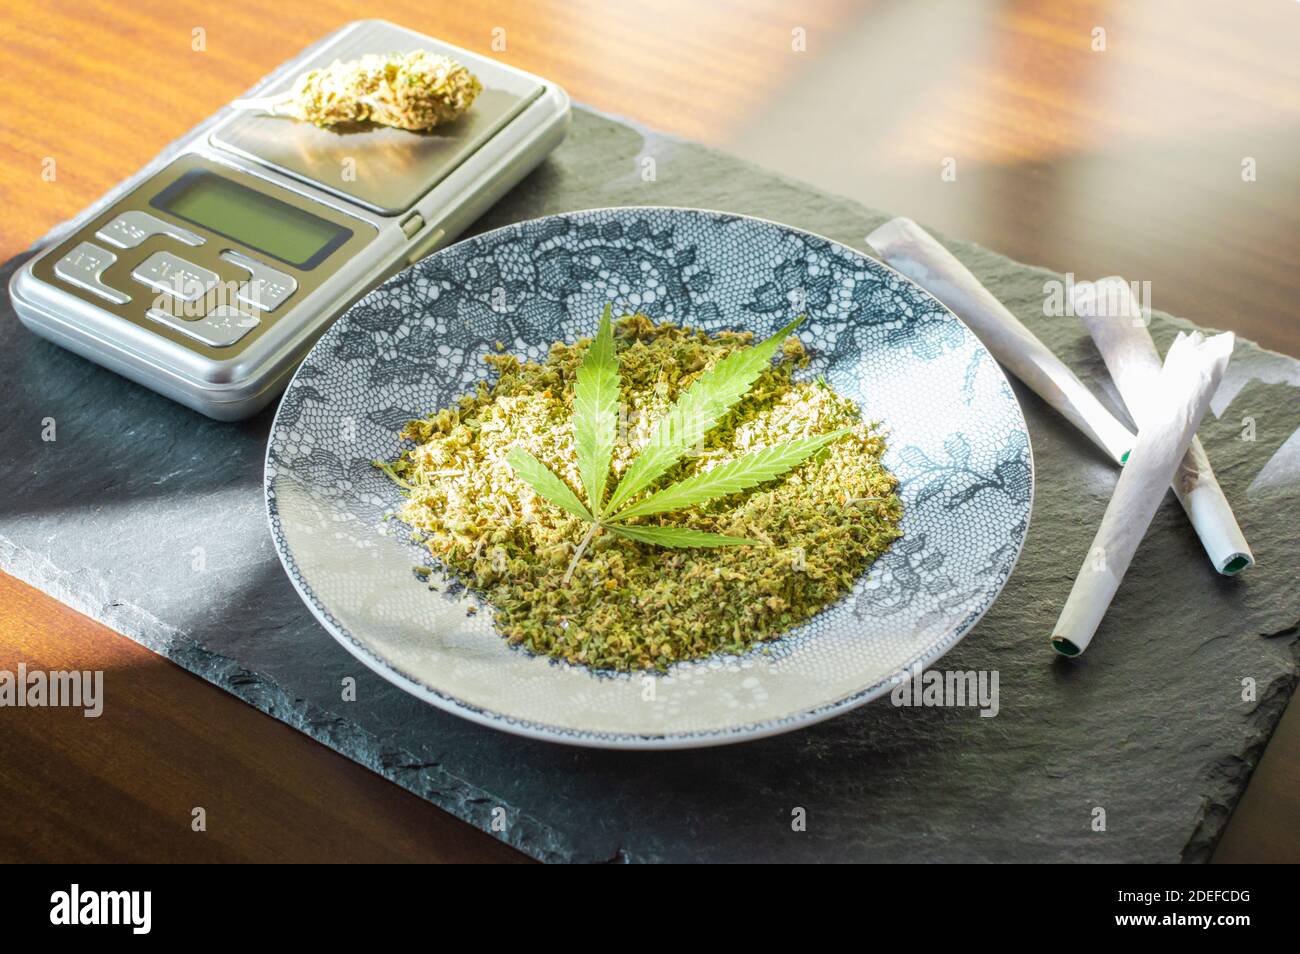 https://c8.alamy.com/comp/2DEFCDG/marijuana-joints-chopped-cannabis-and-digital-scale-on-stone-tray-with-sun-rays-2DEFCDG.jpg